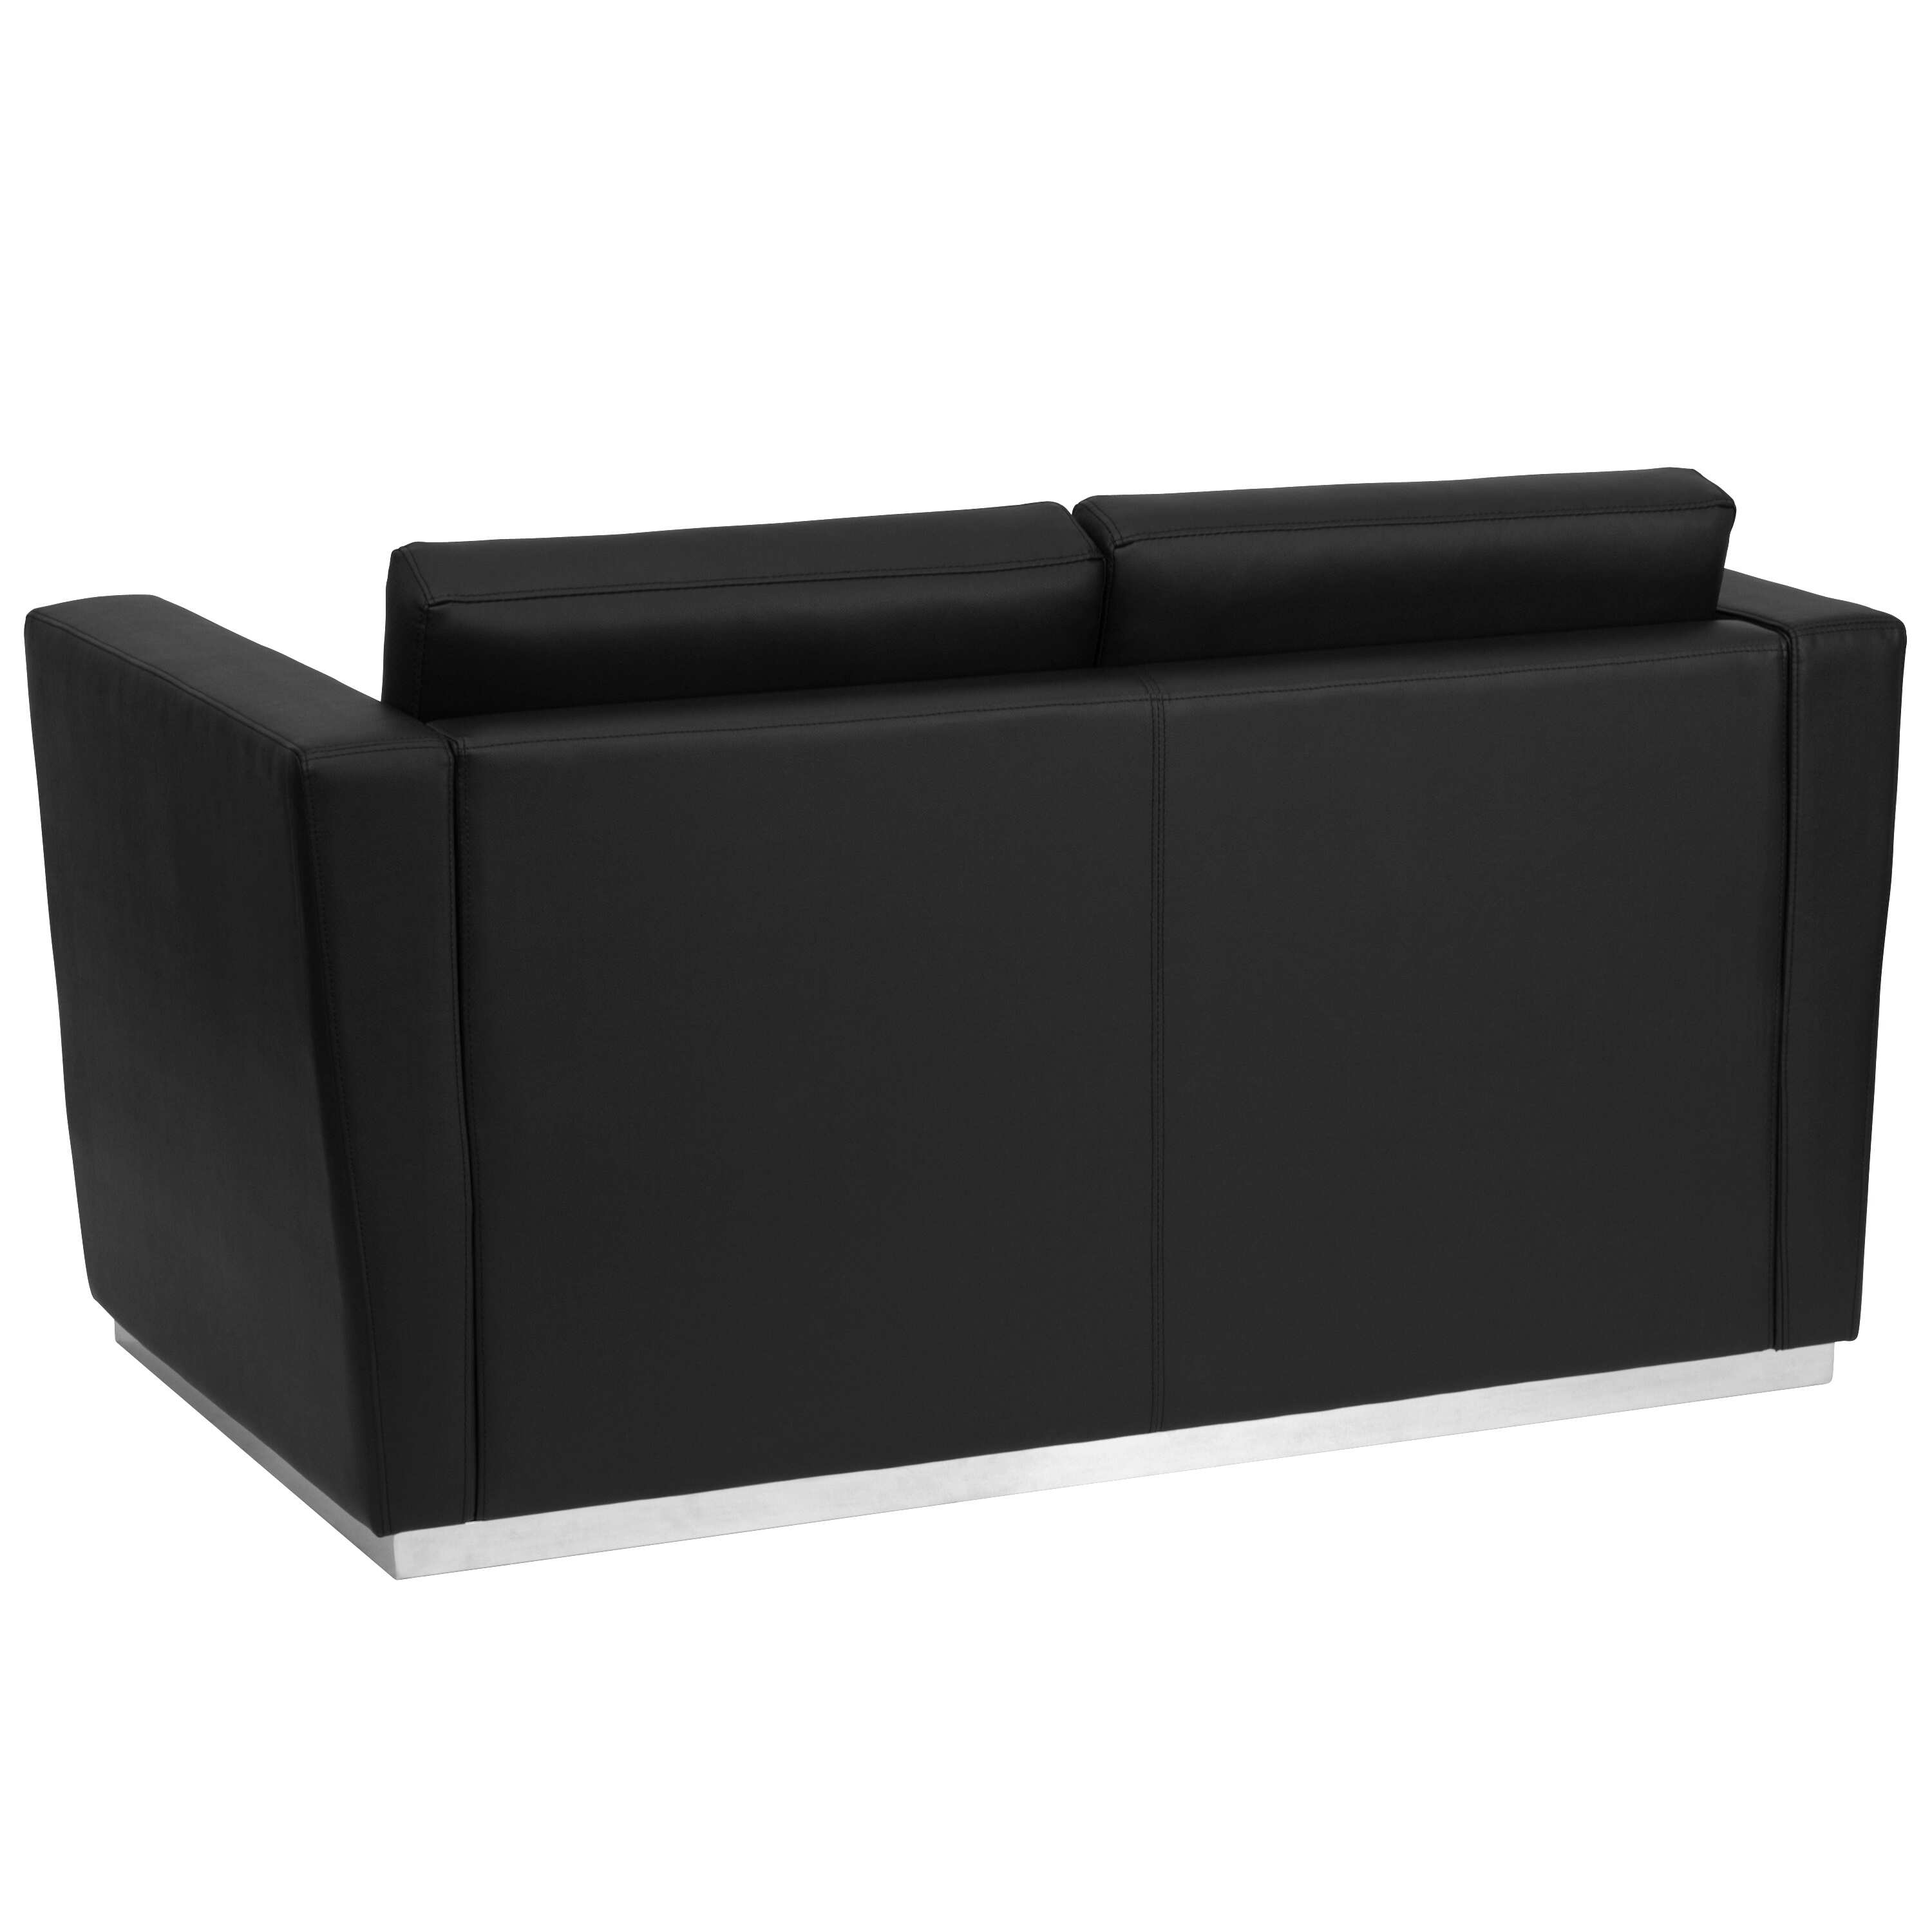 Contemporary LeatherSoft Loveseat with Stainless Steel Recessed Base - 55.5"W x 32"D x 31"H